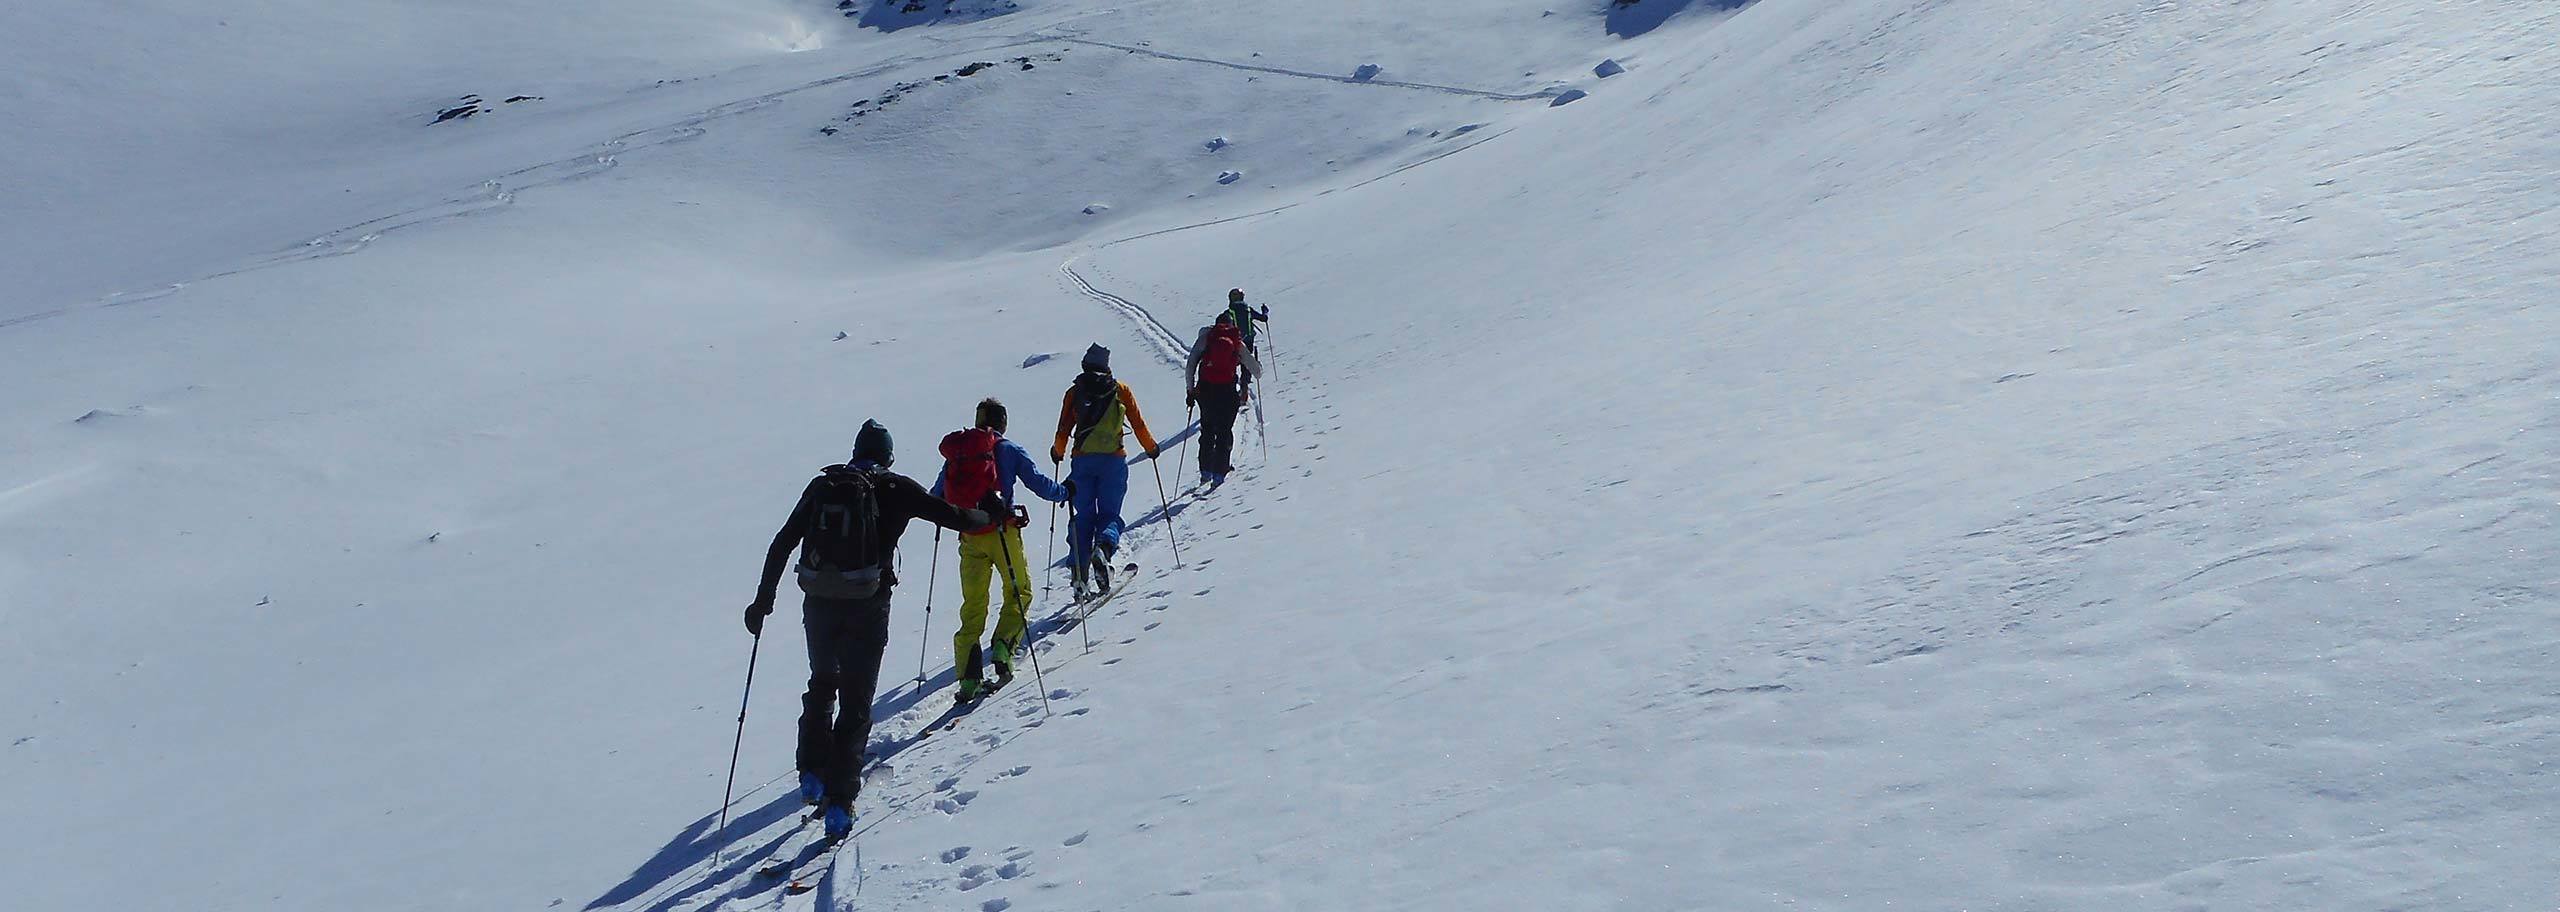 Madonna di Campiglio Ski Touring Experiences, Day Trips and Courses